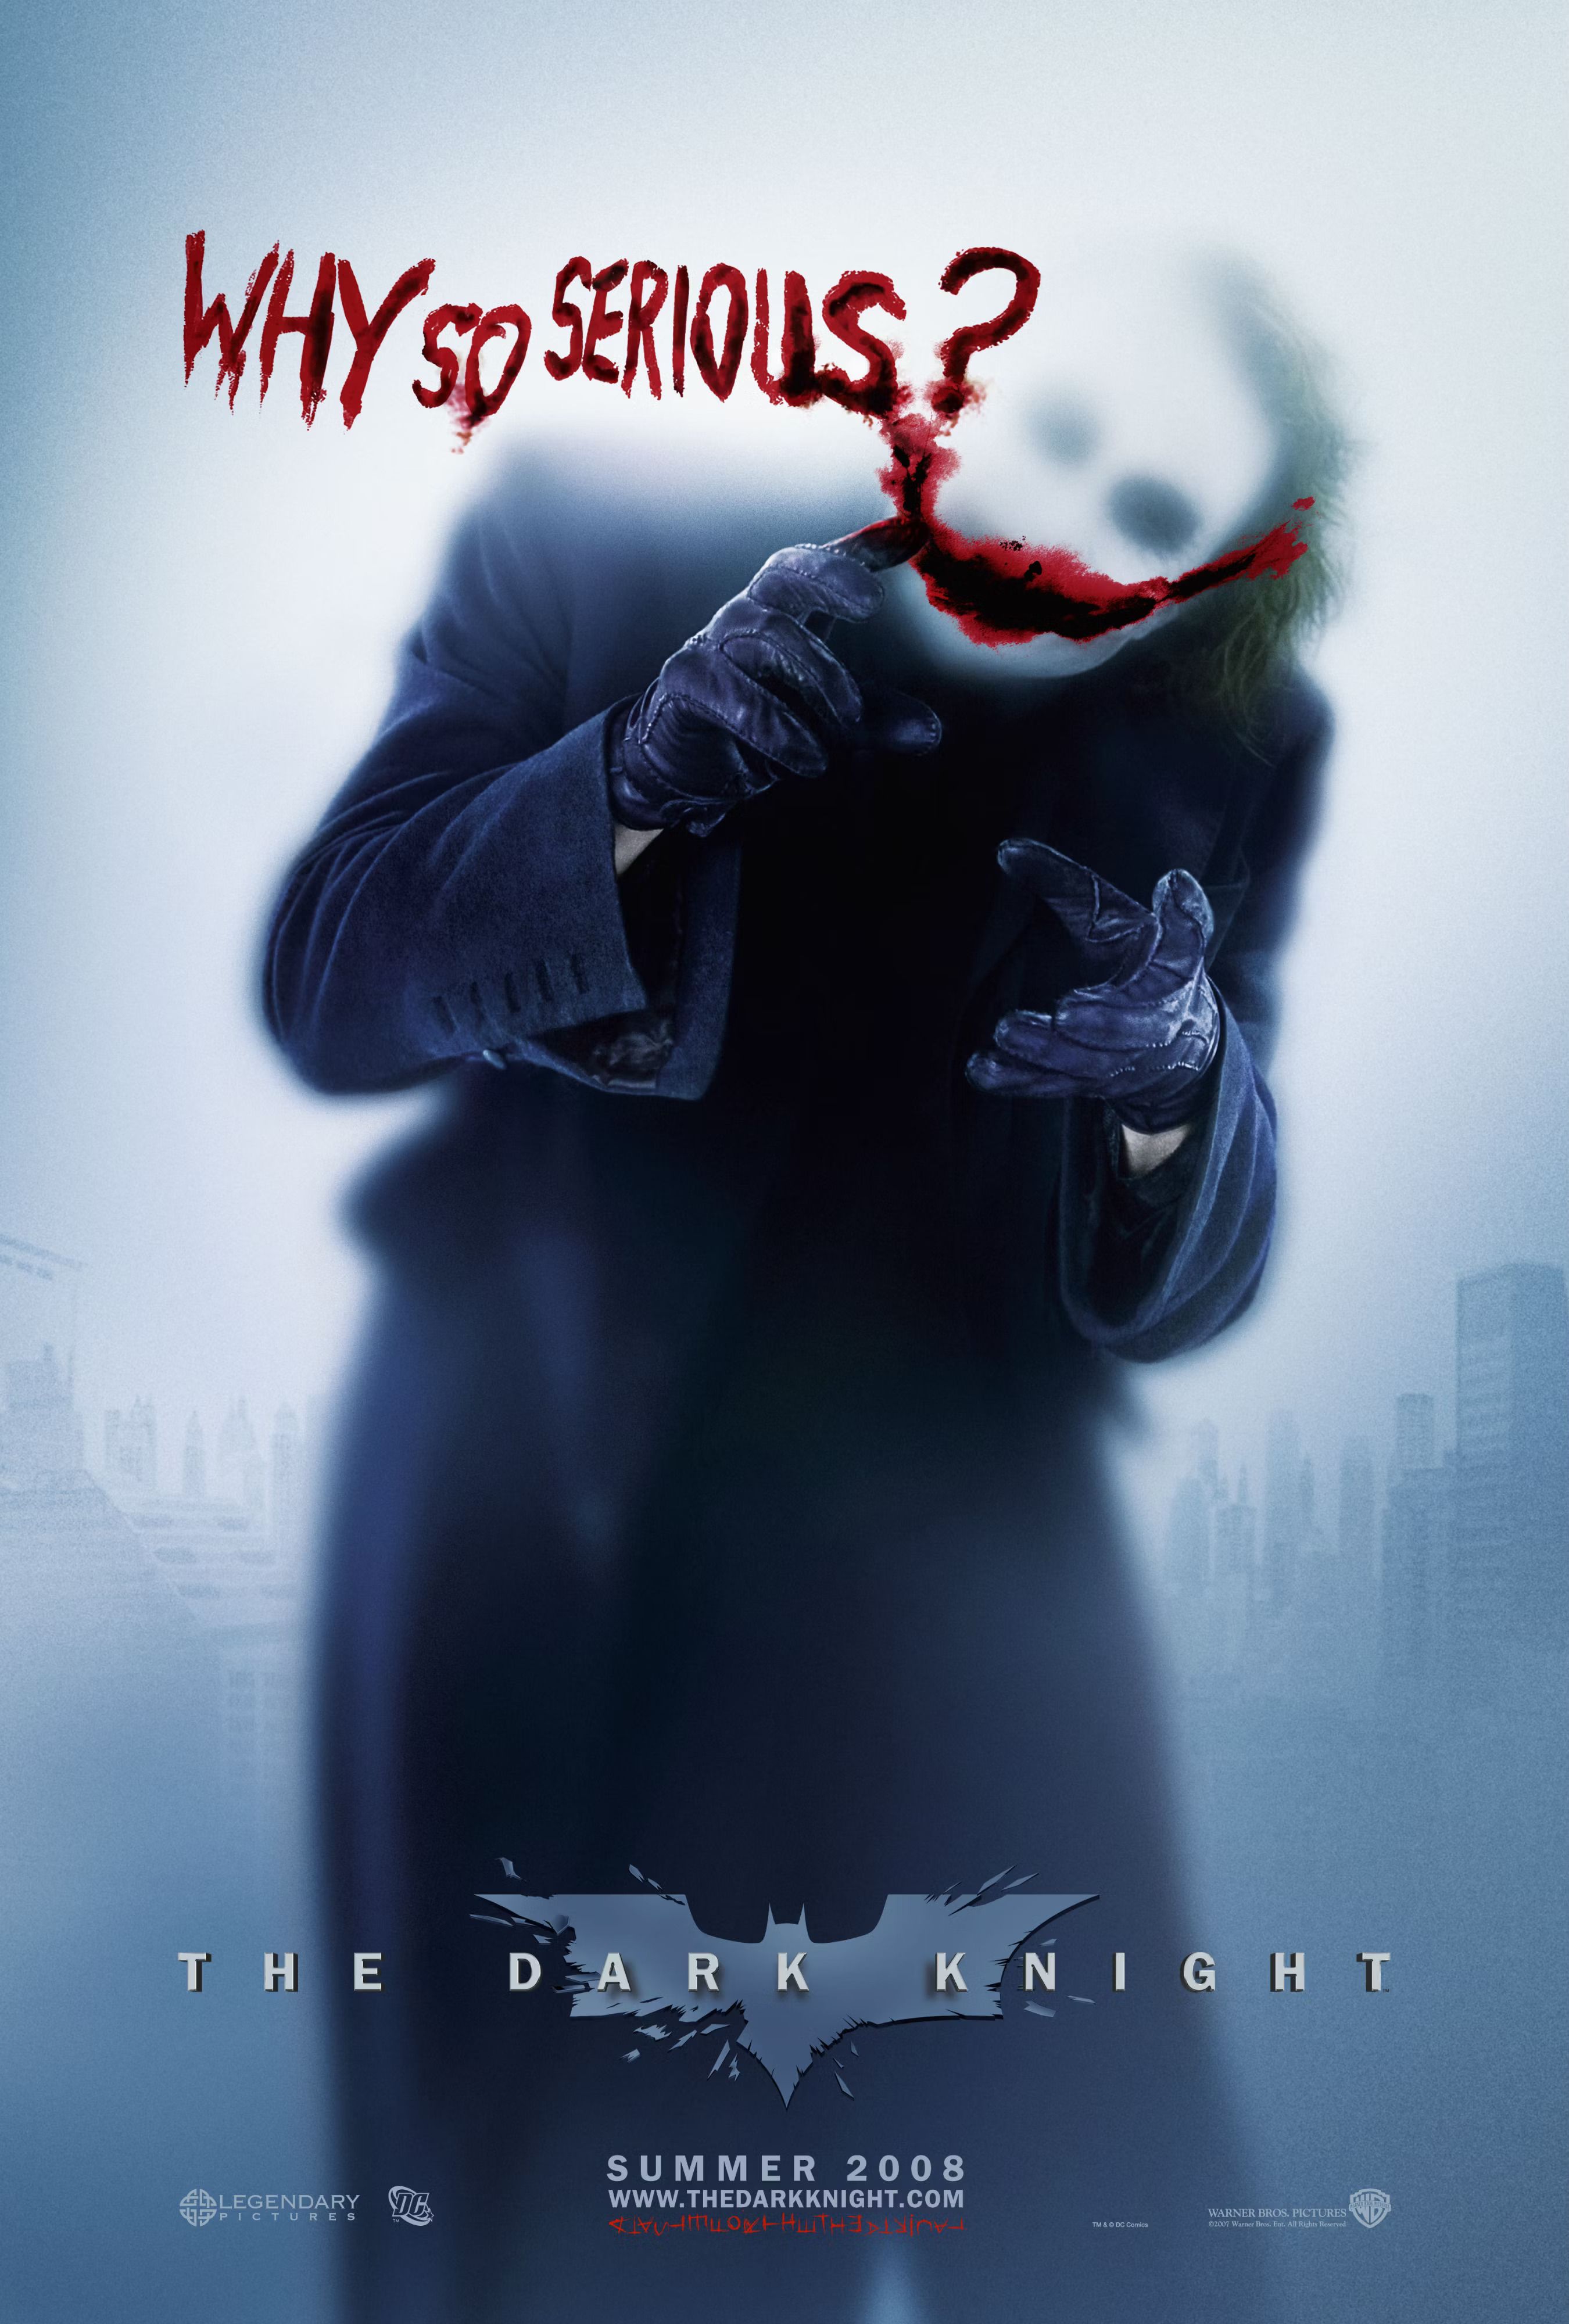 The Joker writes in blood in one of the posters of The Dark Knight